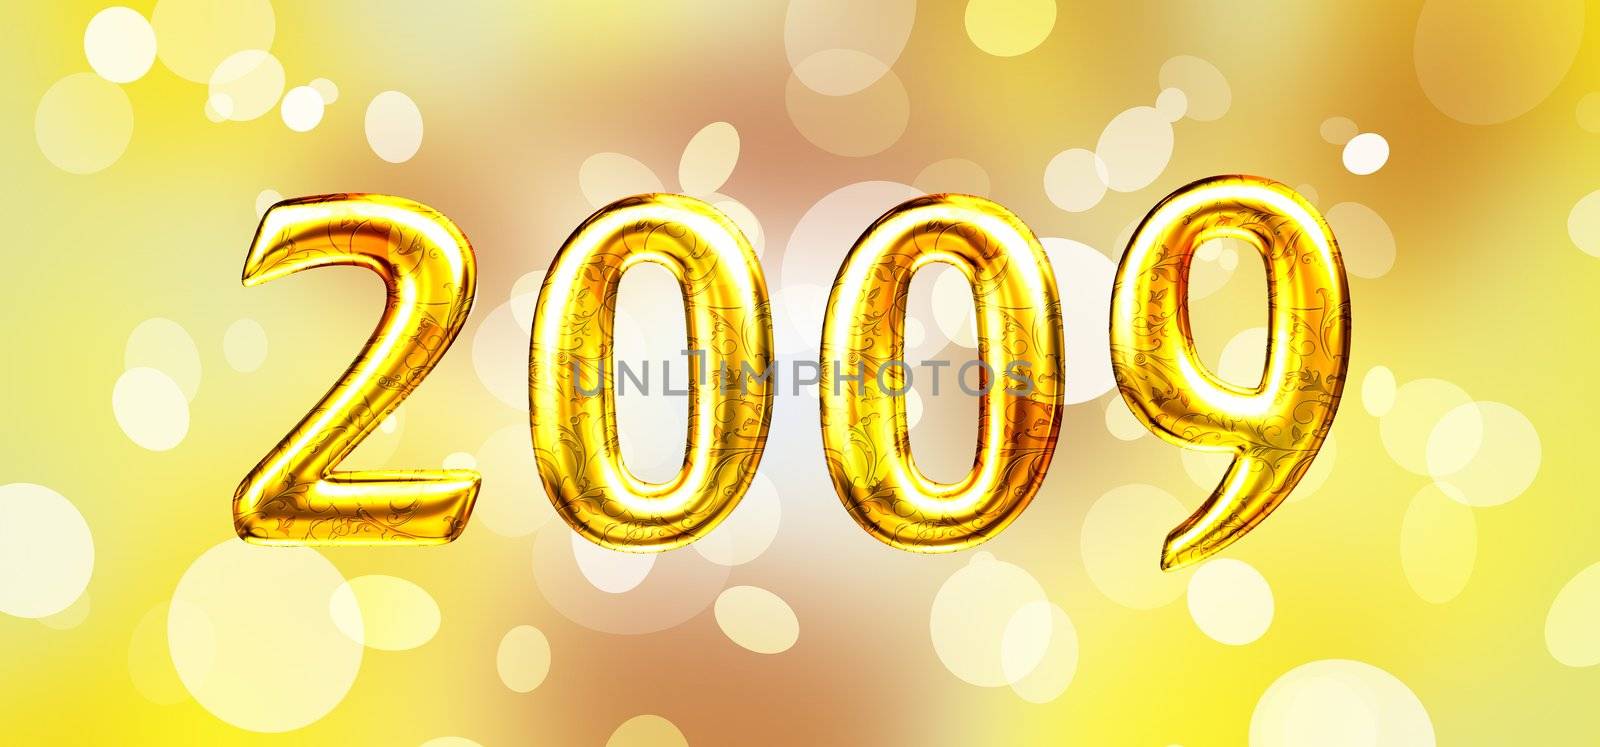 "2009" on colorful background